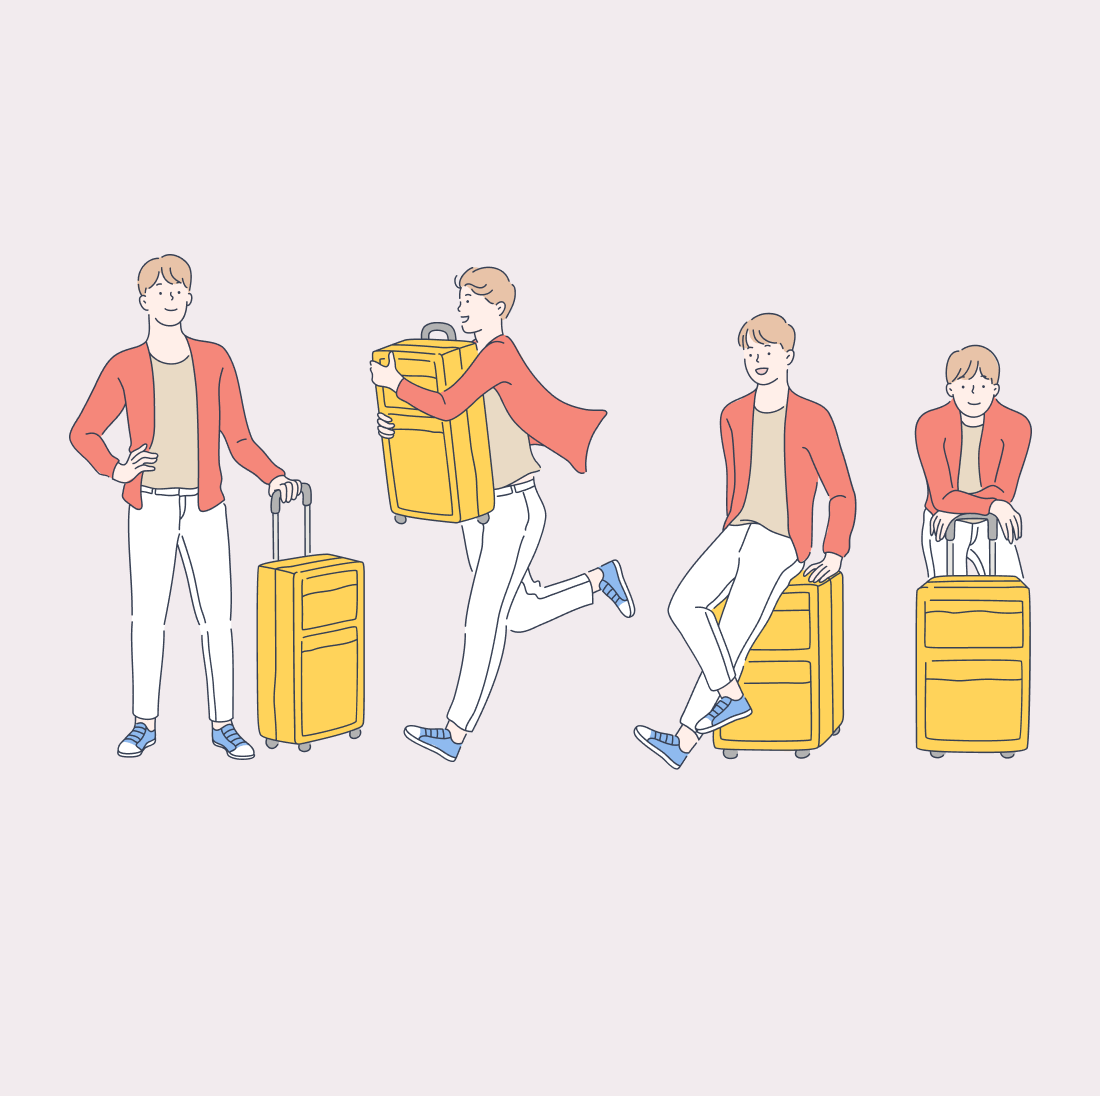 A happy guy in a red jacket and a yellow suitcase is preparing for a trip.